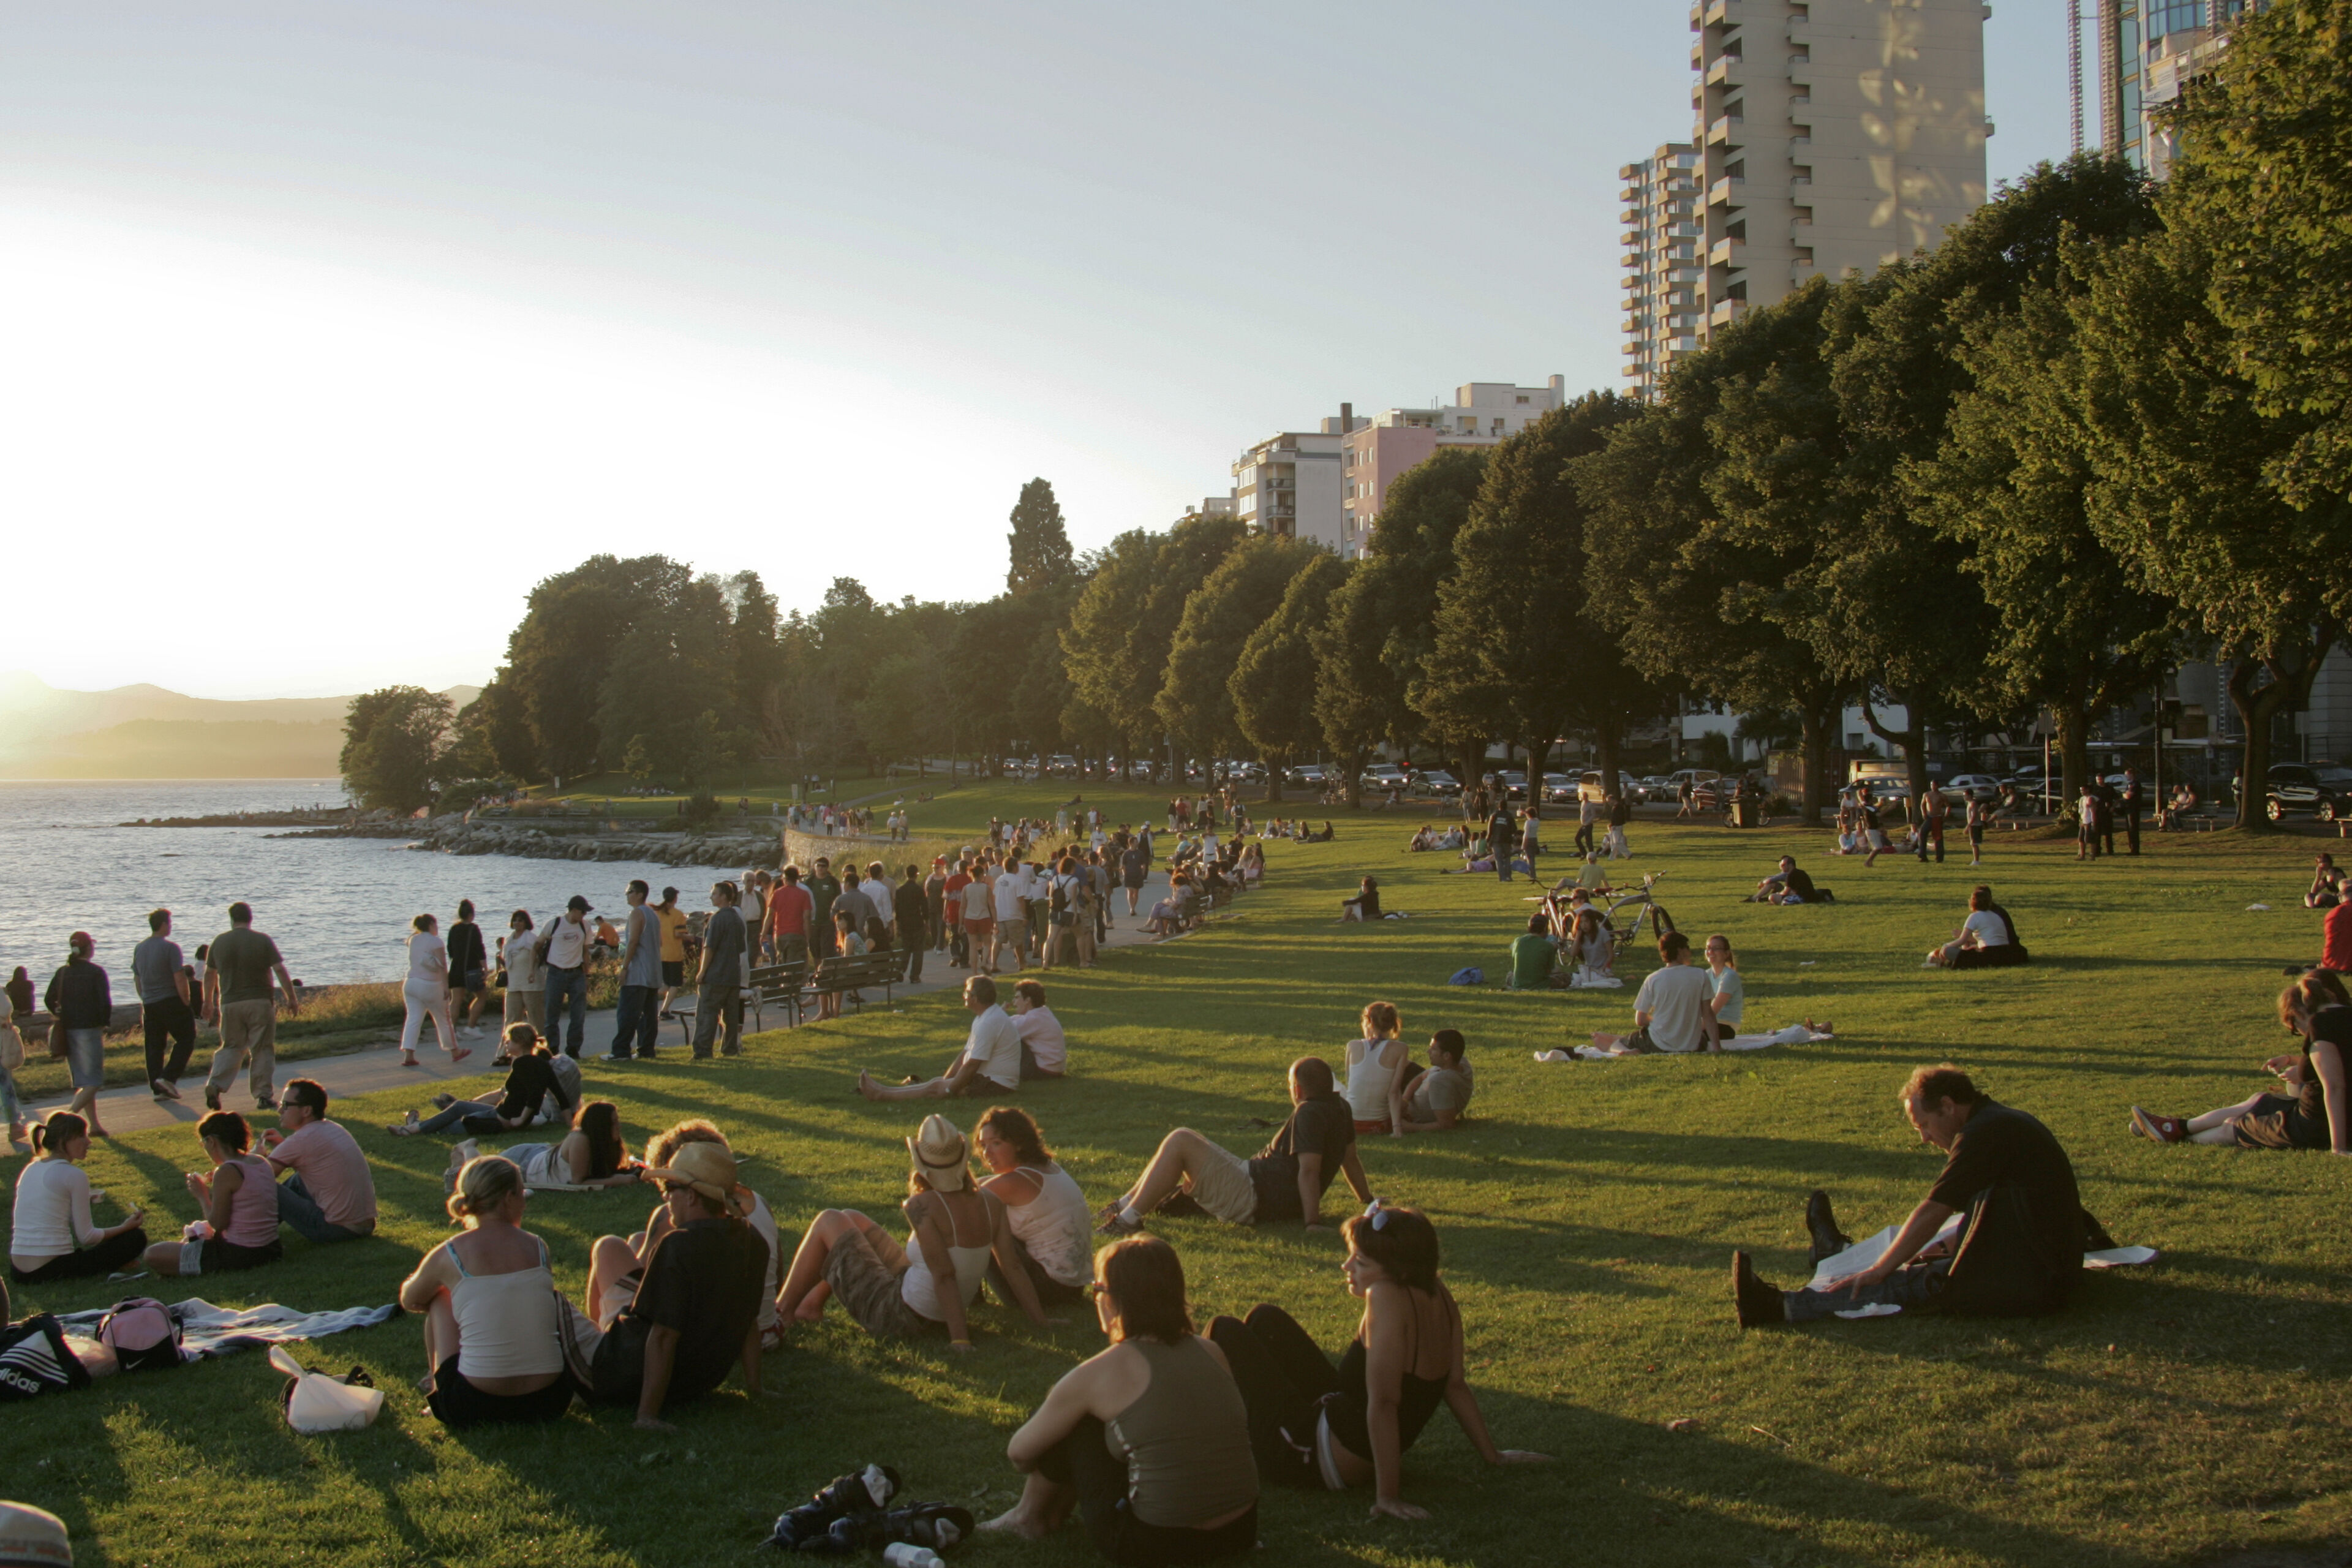 A serene sunset scene at an urban park with people lounging on the grass and walking along the waterfront, enjoying the warm evening light.